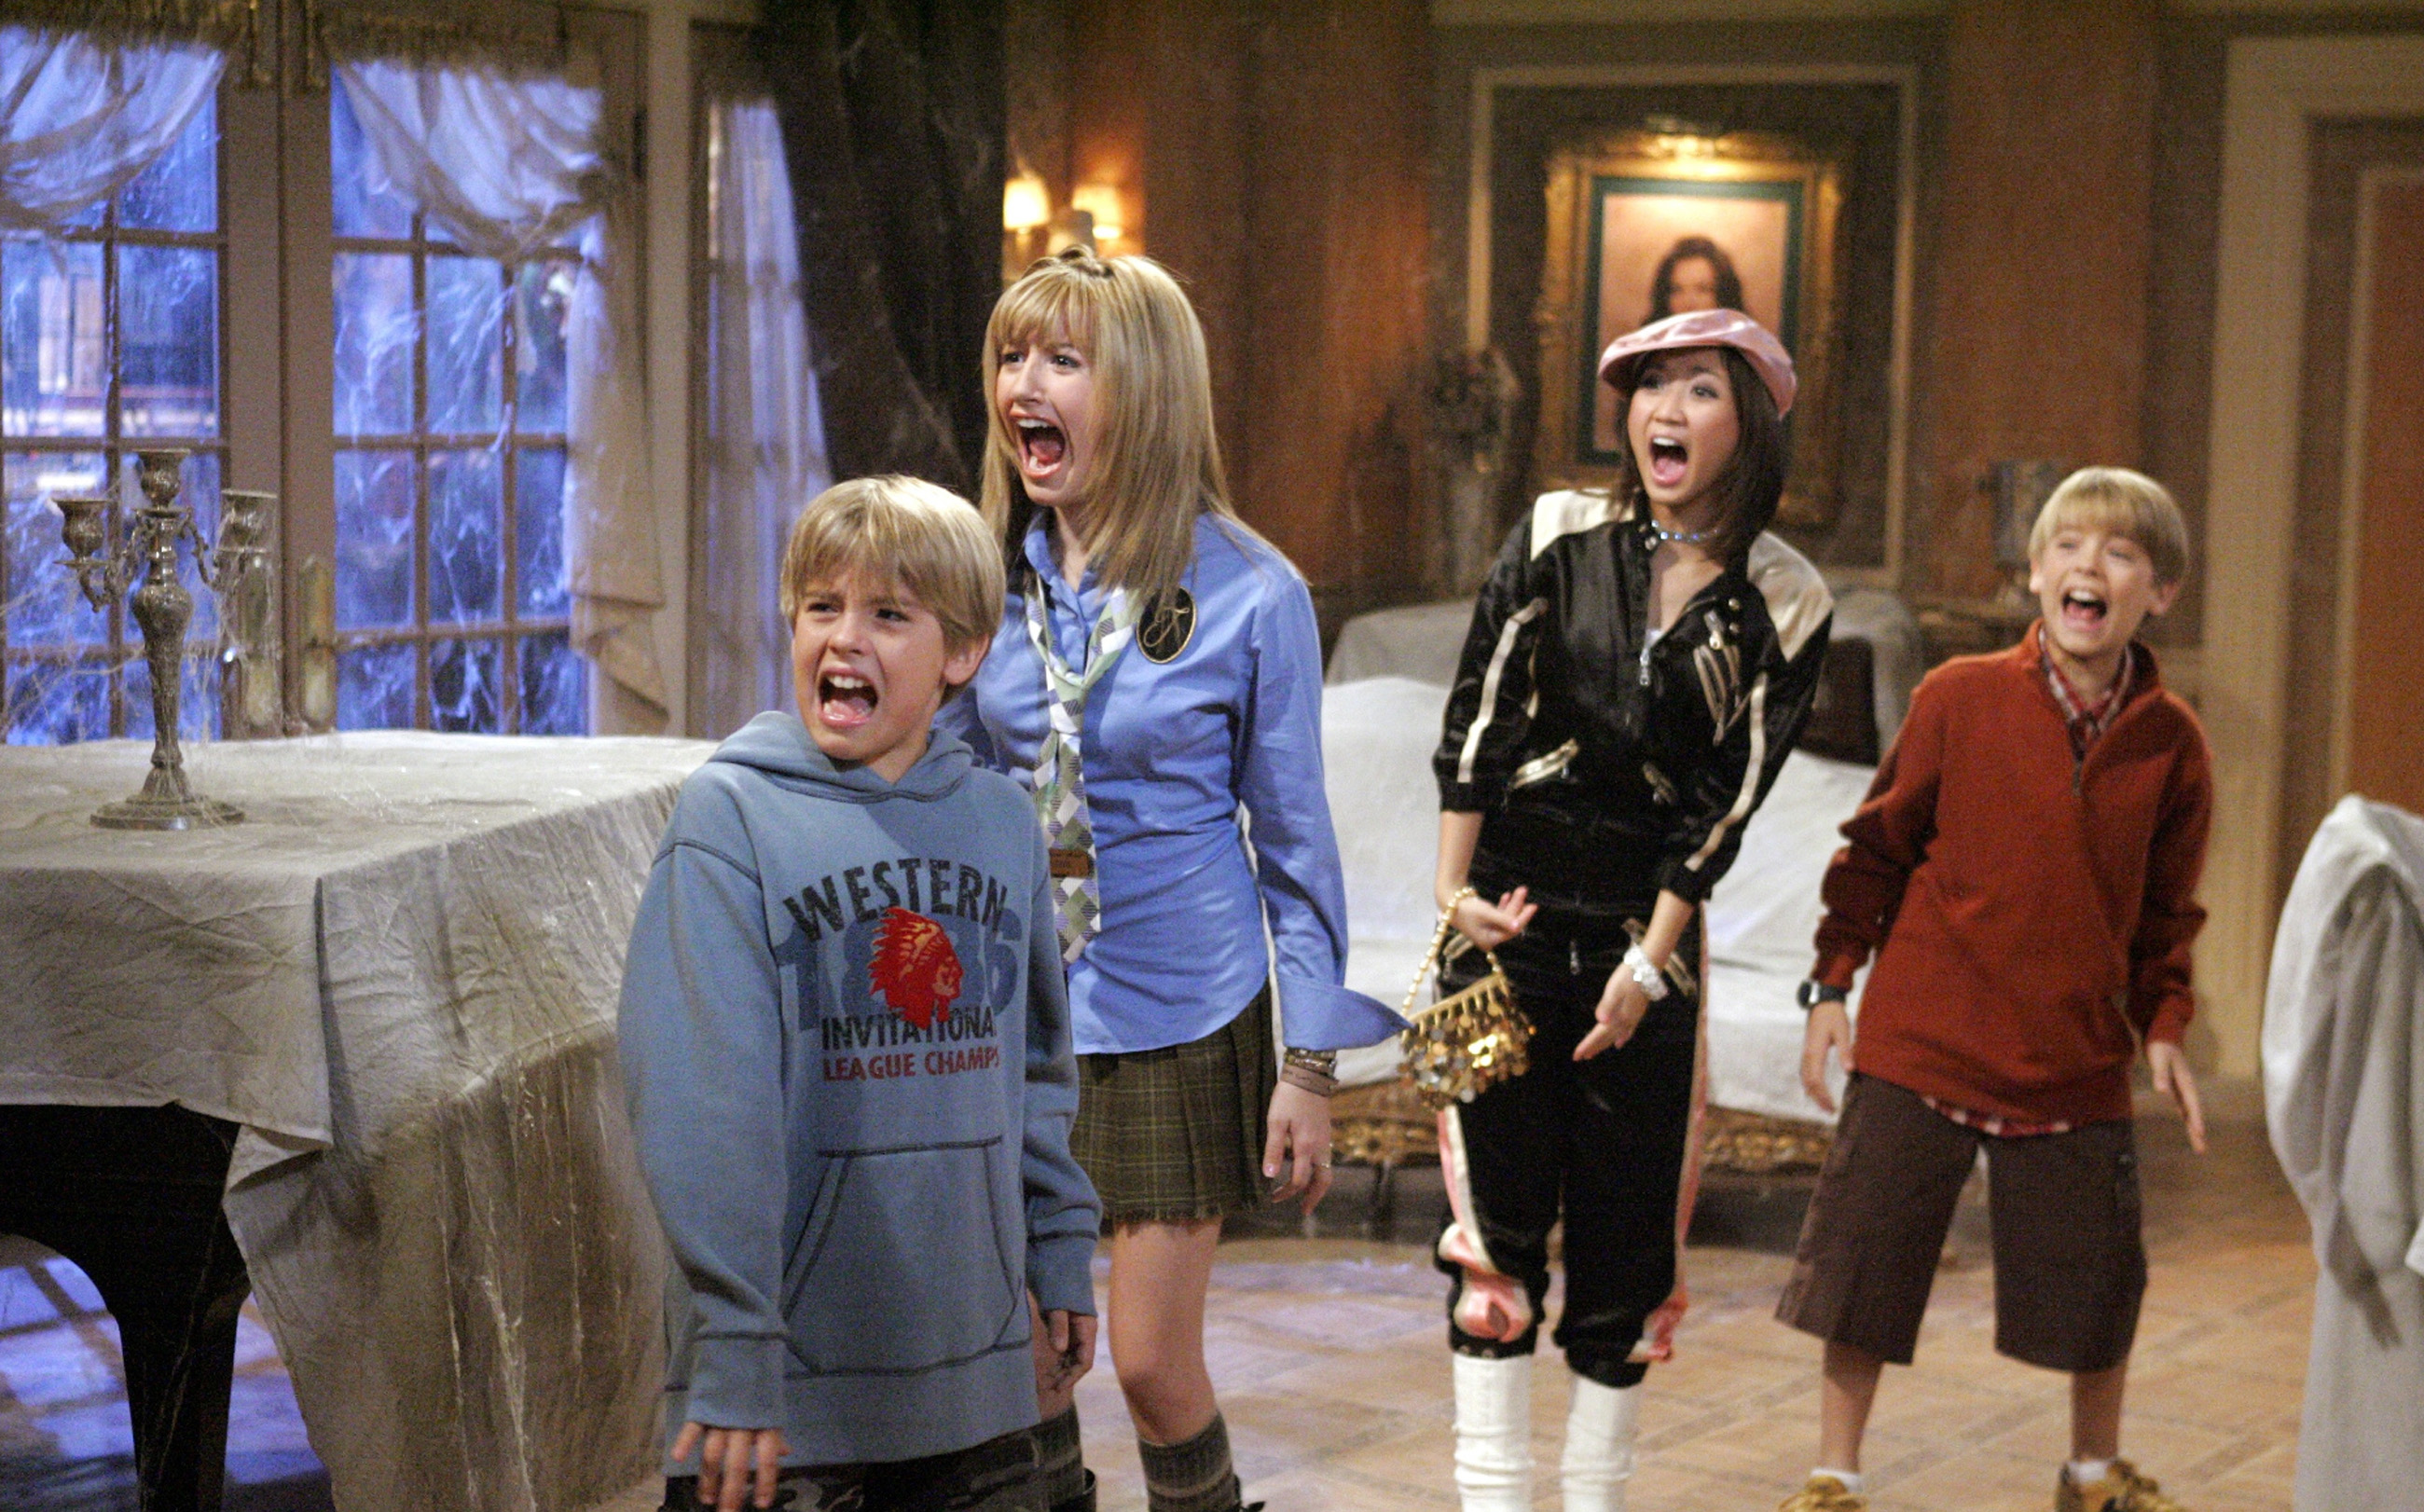 Dylan Sprouse in The Suite Life of Zack and Cody (Season 1)